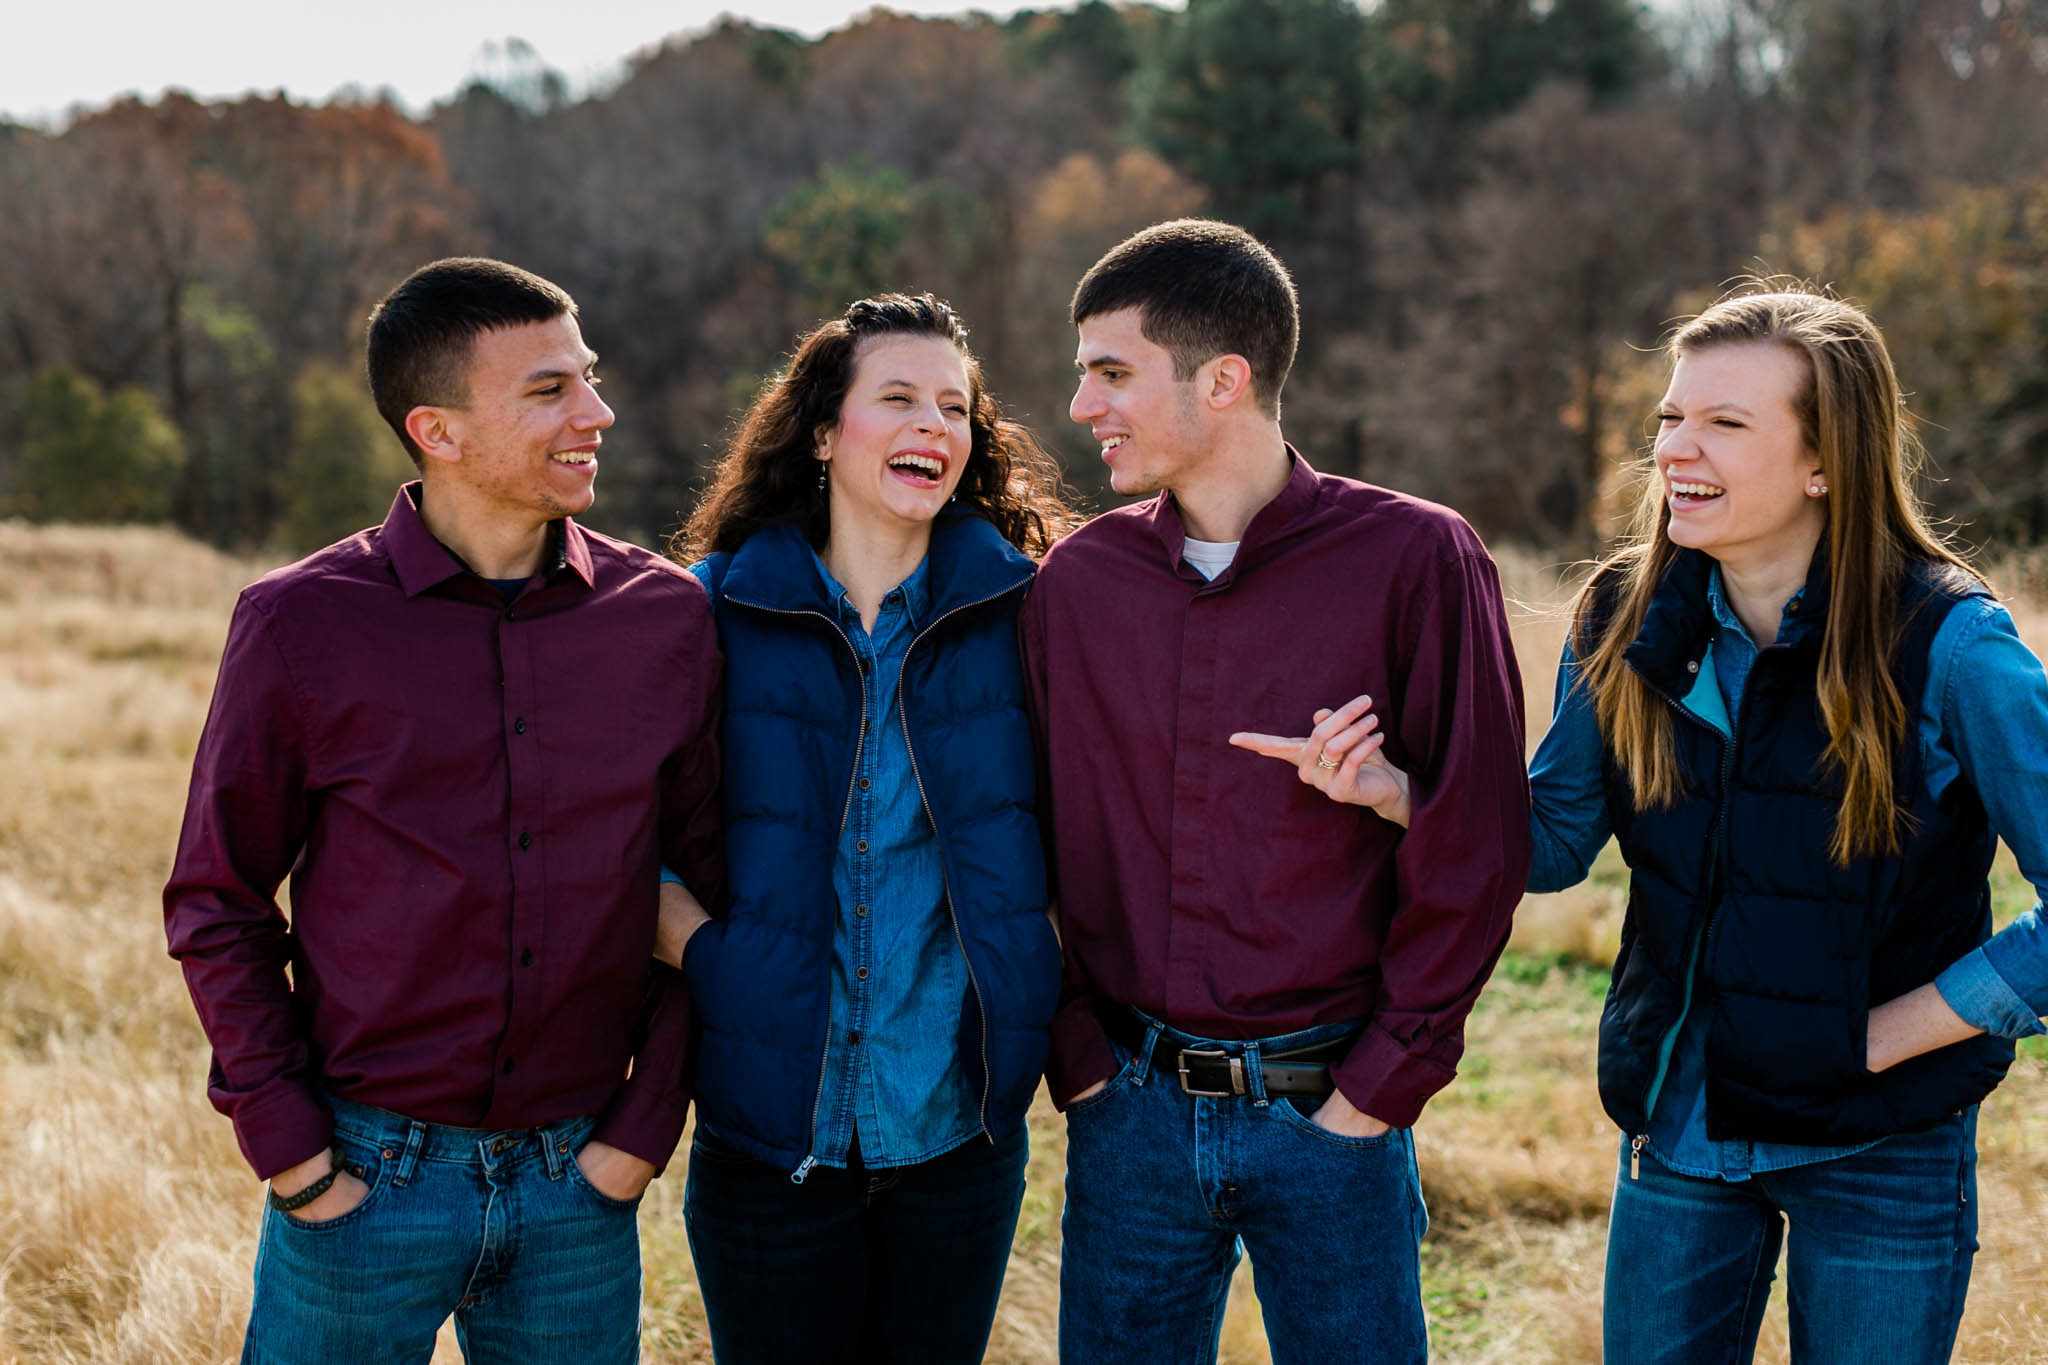 Candid portrait of people laughing | Raleigh Family Photographer | By G. Lin Photography